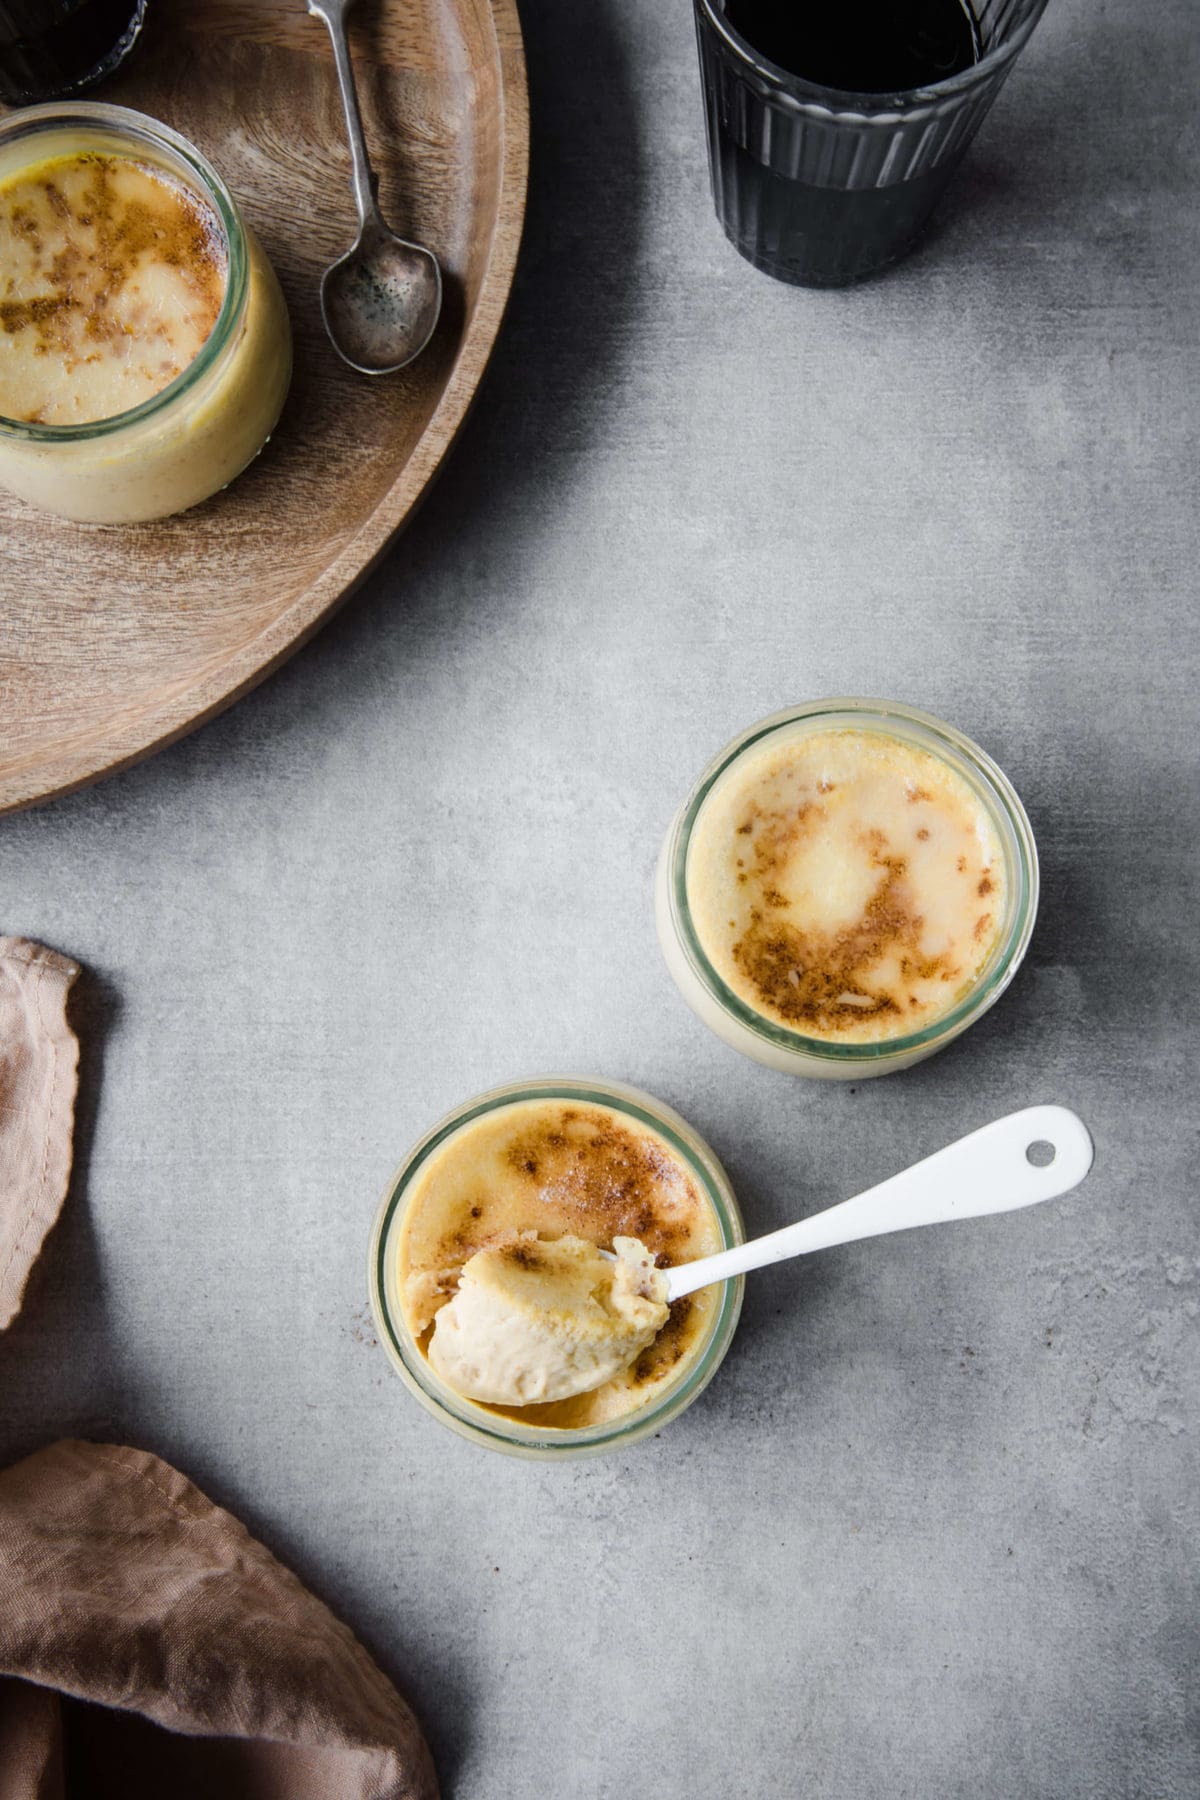 Keto Pumpkin Spice Creme BrÃ»lÃ©e has a rich and creamy texture inside and a delightfully crunchy top. It's the perfect year round low carb dessert recipe.